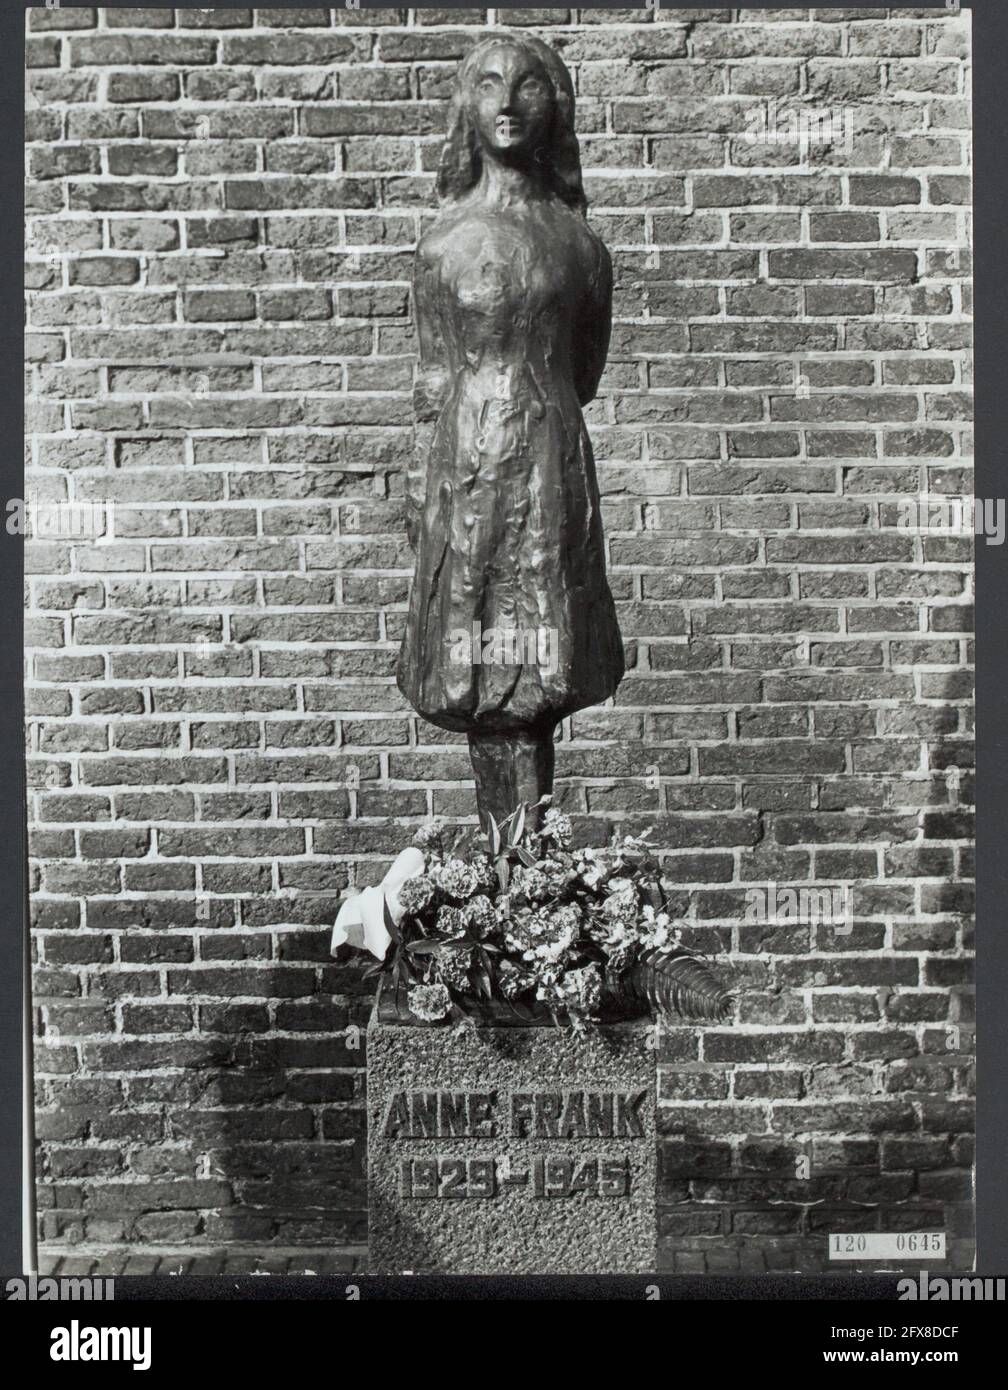 Statue of Anne Frank at Westermarkt in Amsterdam unveiled by mayor Samkalden; the statue made by sculptor Mari Andriessen, March 14, 1977, sculpture, statues, World War II, The Netherlands, 20th century press agency photo, news to remember, documentary, historic photography 1945-1990, visual stories, human history of the Twentieth Century, capturing moments in time Stock Photo